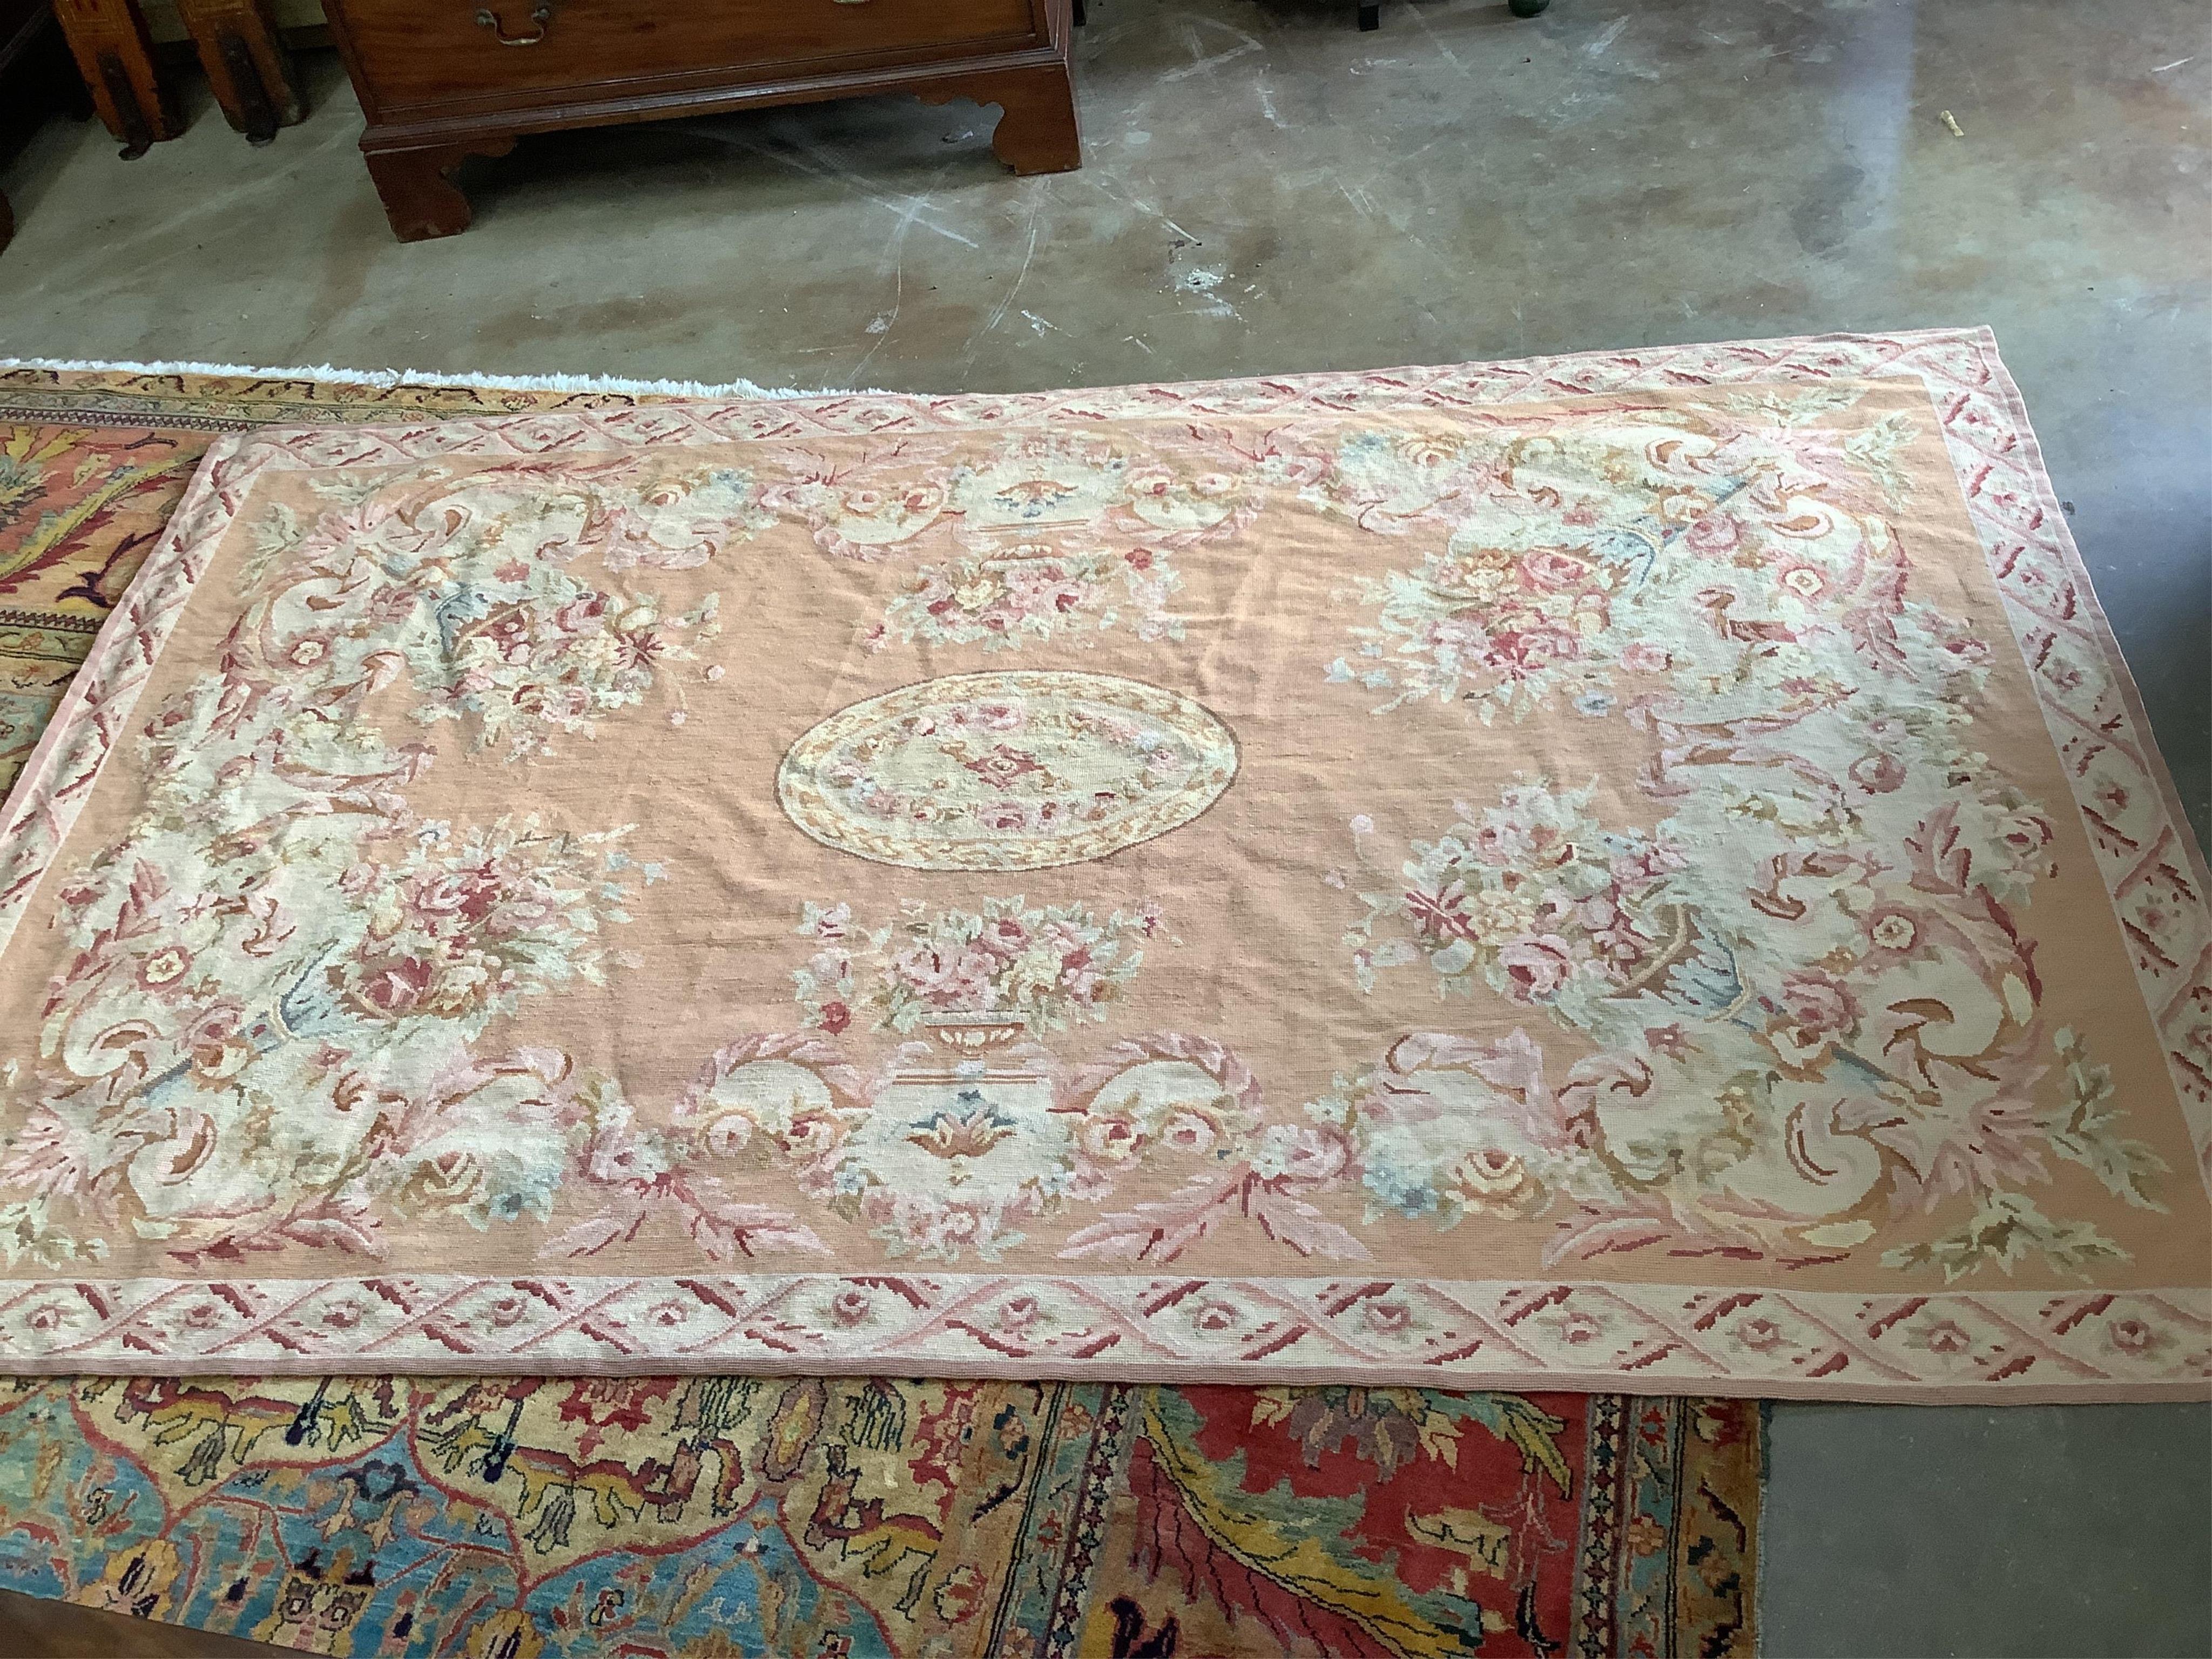 An Aubusson style tapestry rug, approx. 220 x 140cm. Condition - good